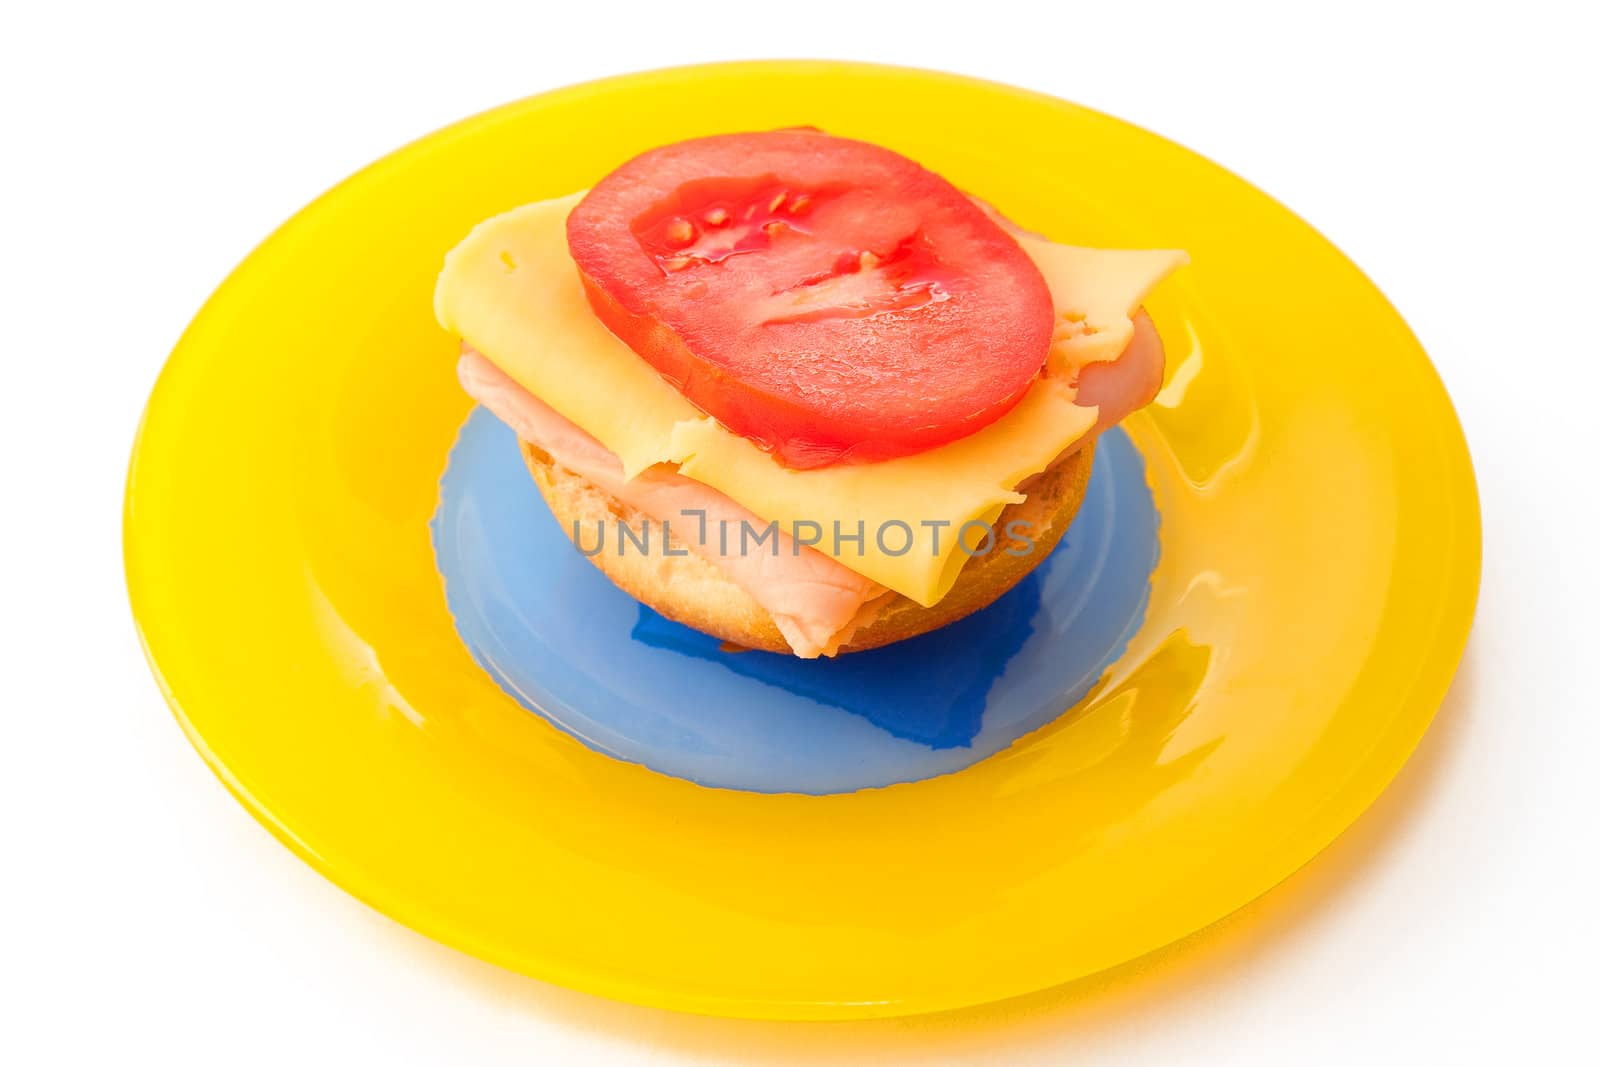 Colorful sandwich on the yellow plate